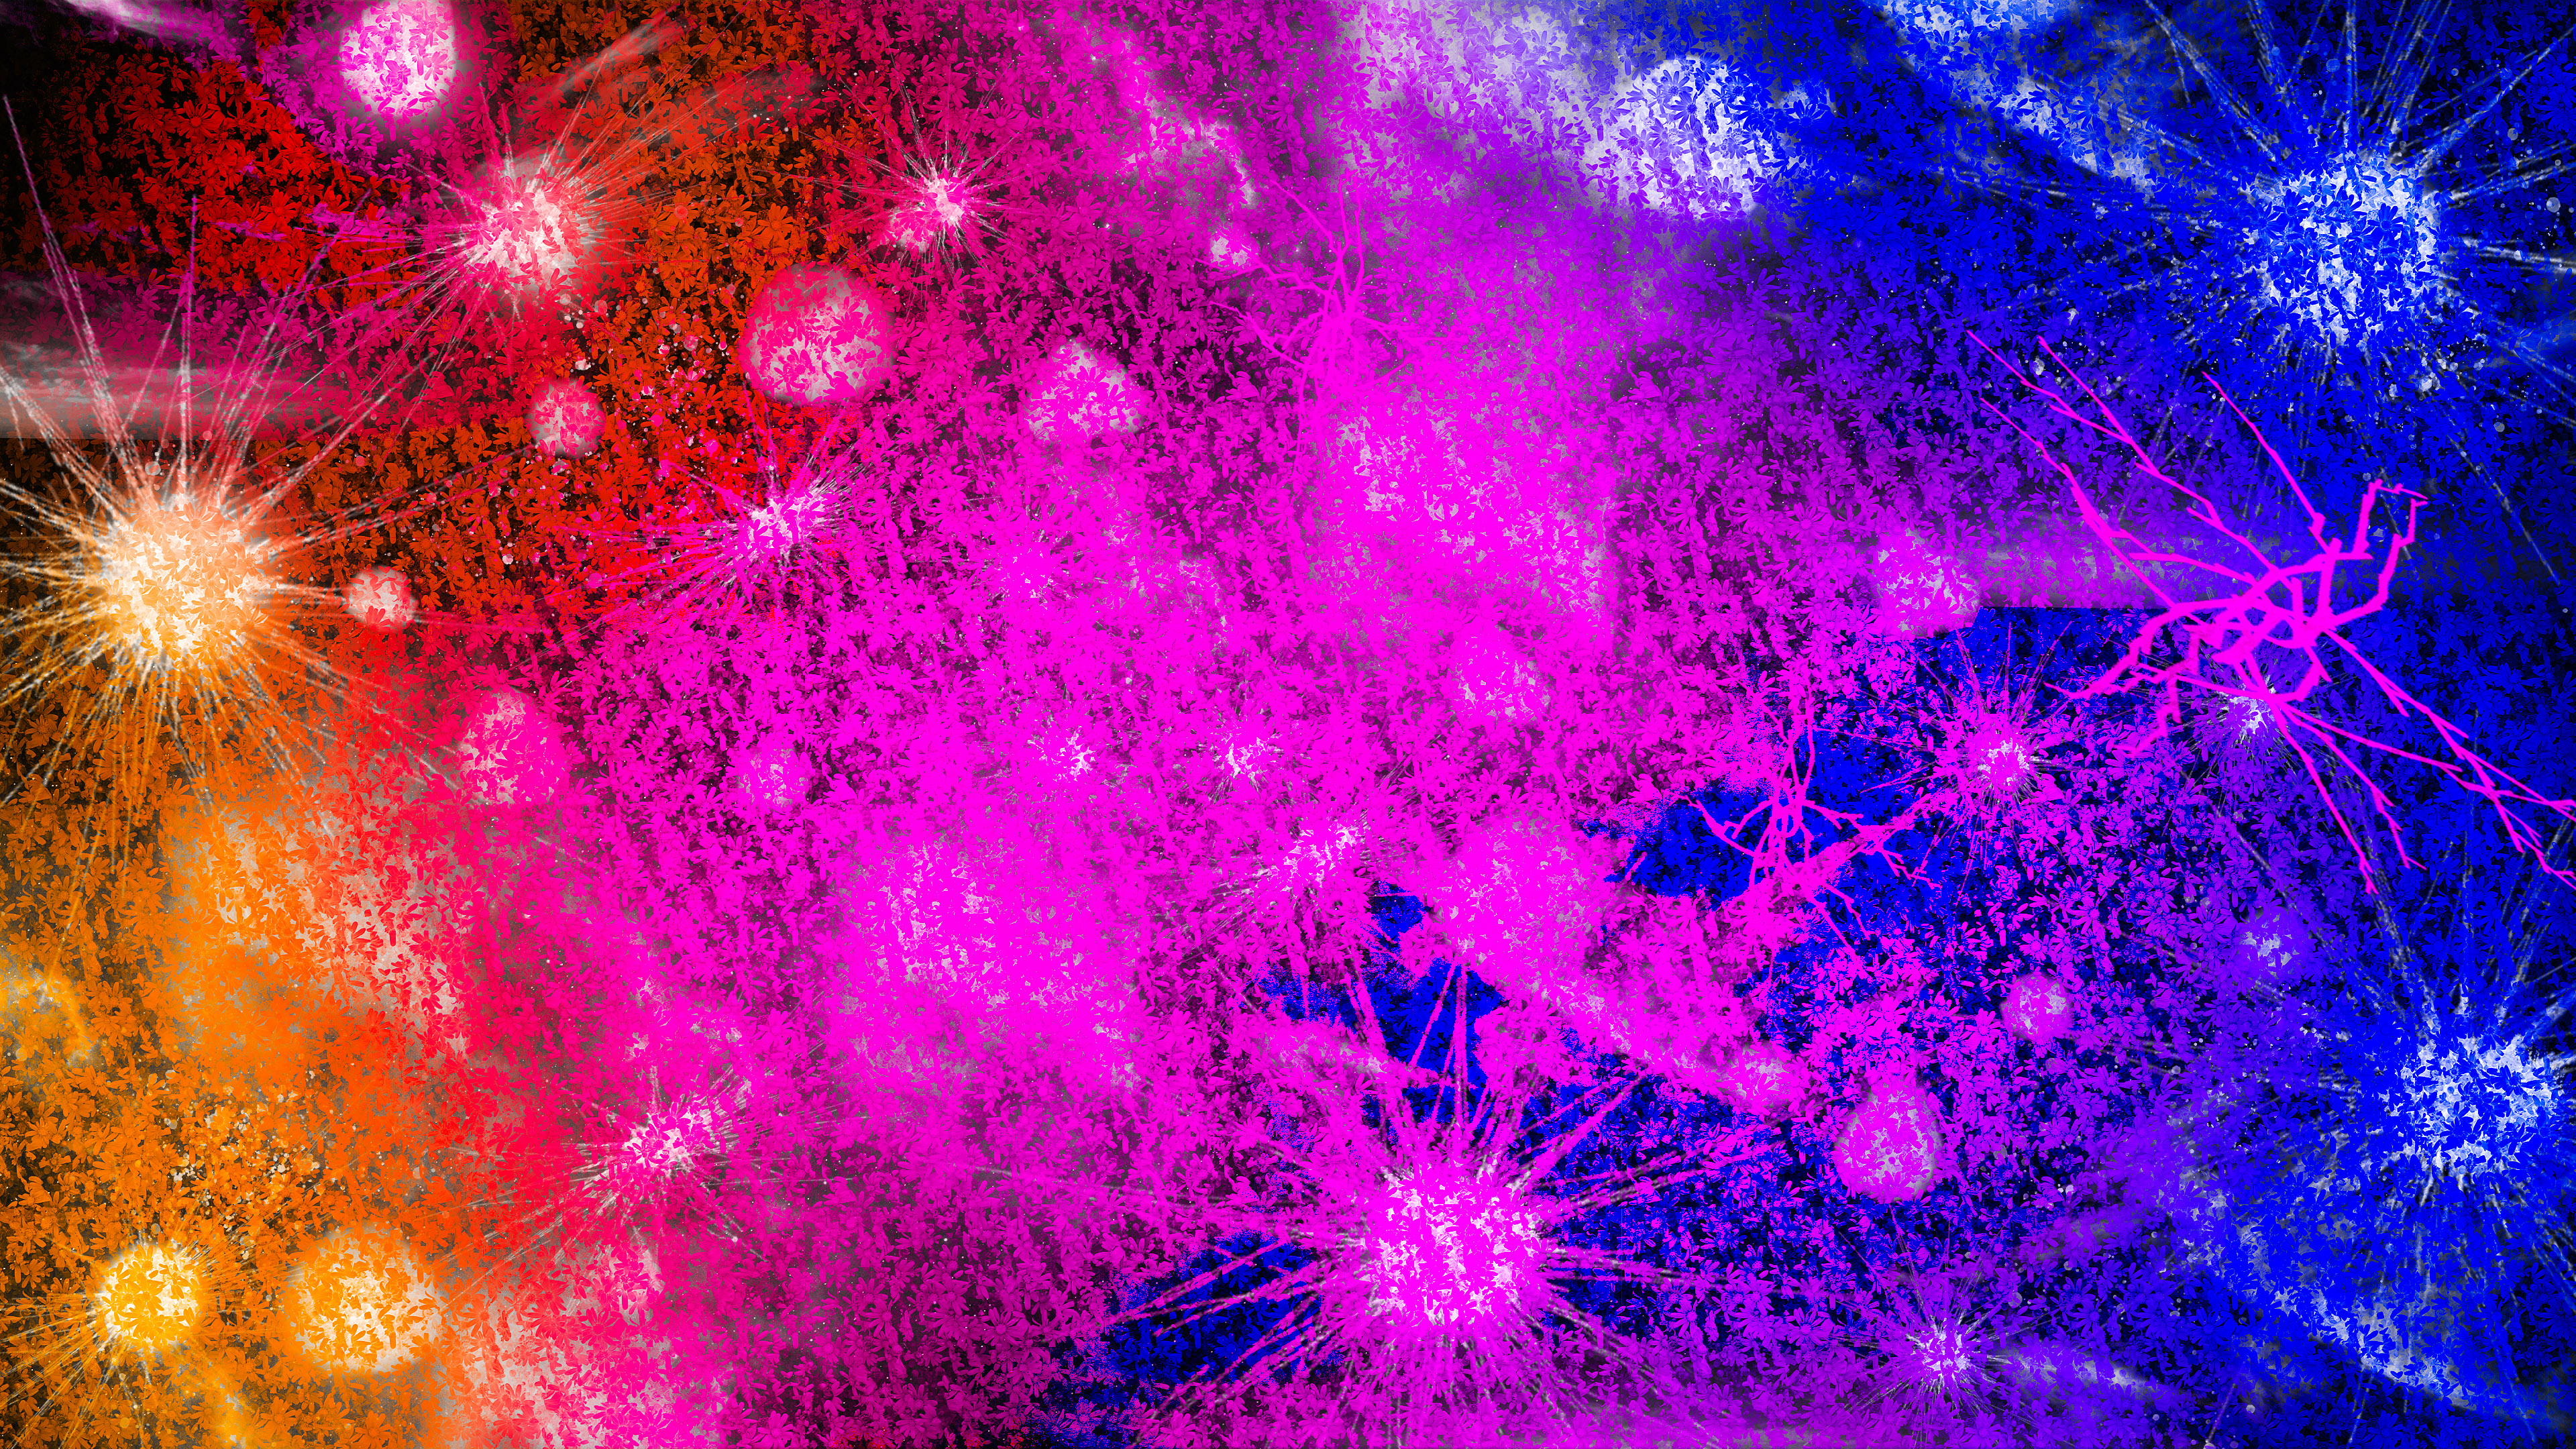 Adorn your desktop with captivating abstract art wallpaper, available for free download.